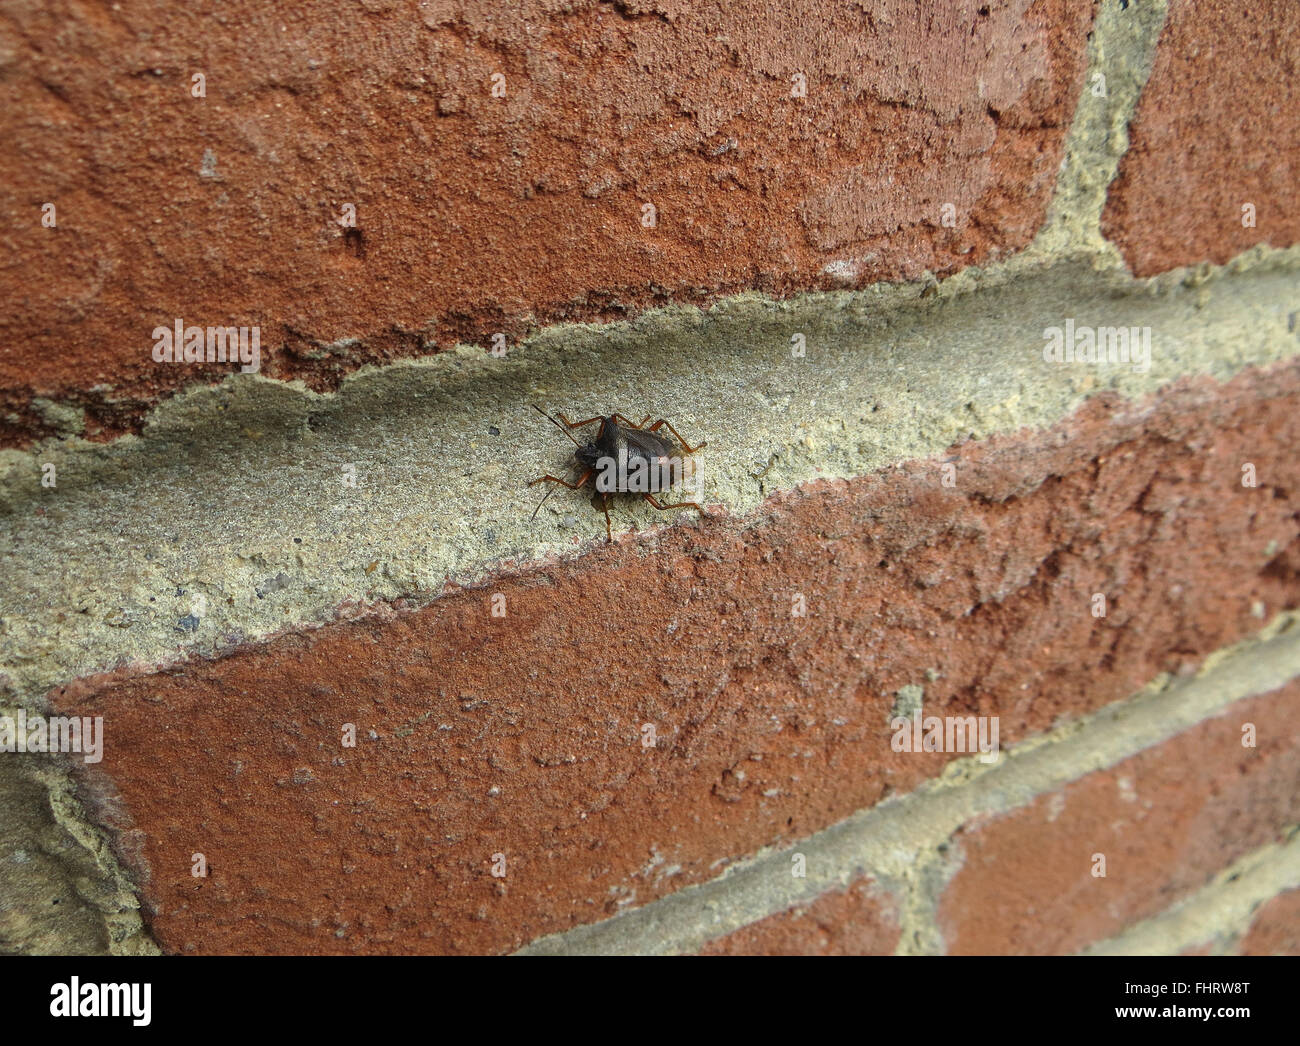 Forest bug (Pentatoma rufipes) on a brick wall Stock Photo